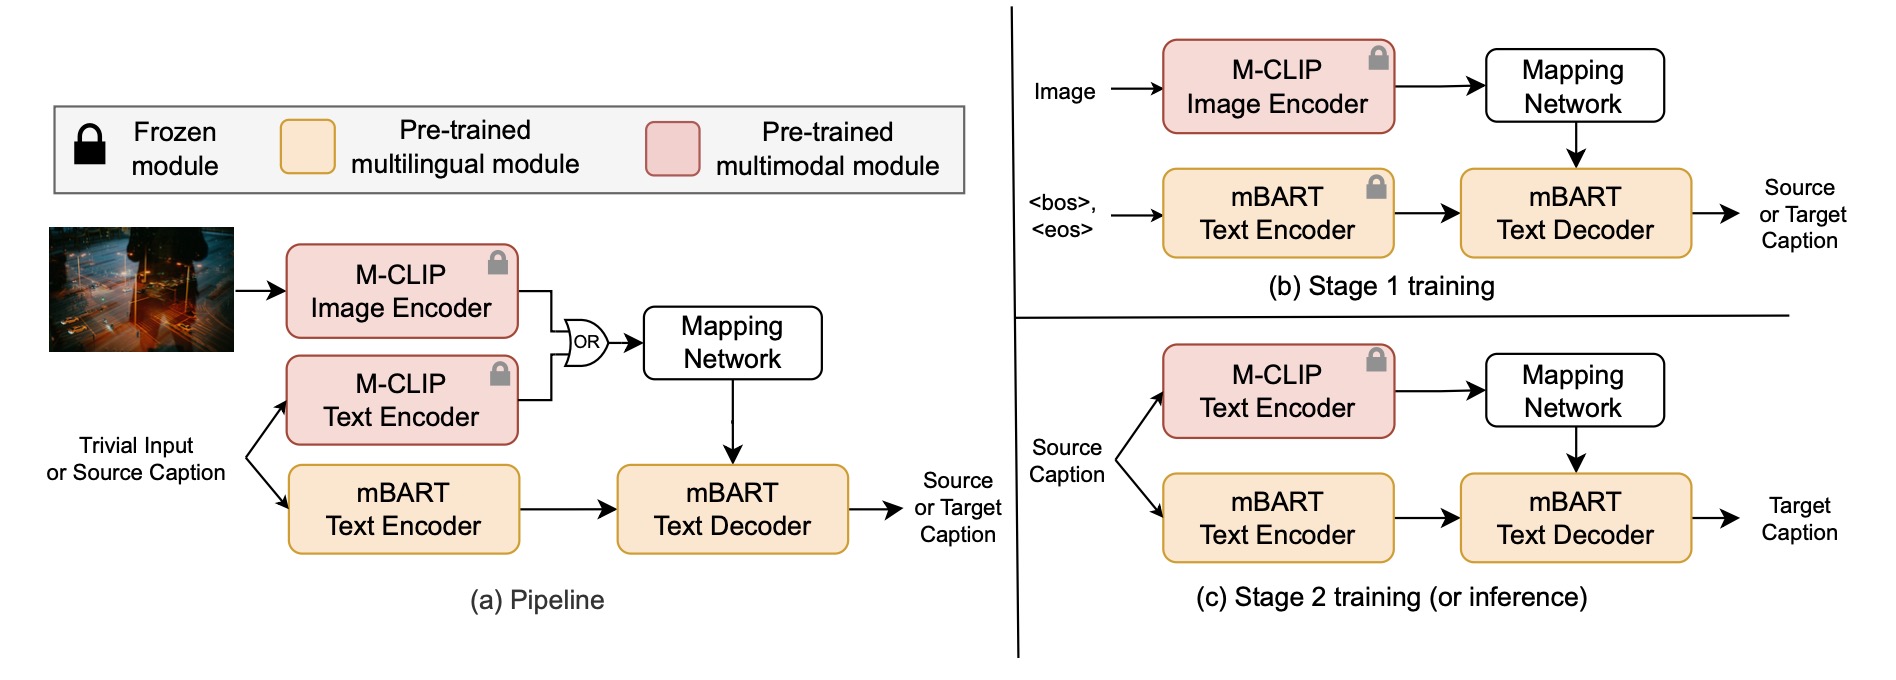 CLIPTrans: Transferring Visual Knowledge with Pre-trained Models for Multimodal Machine Translation